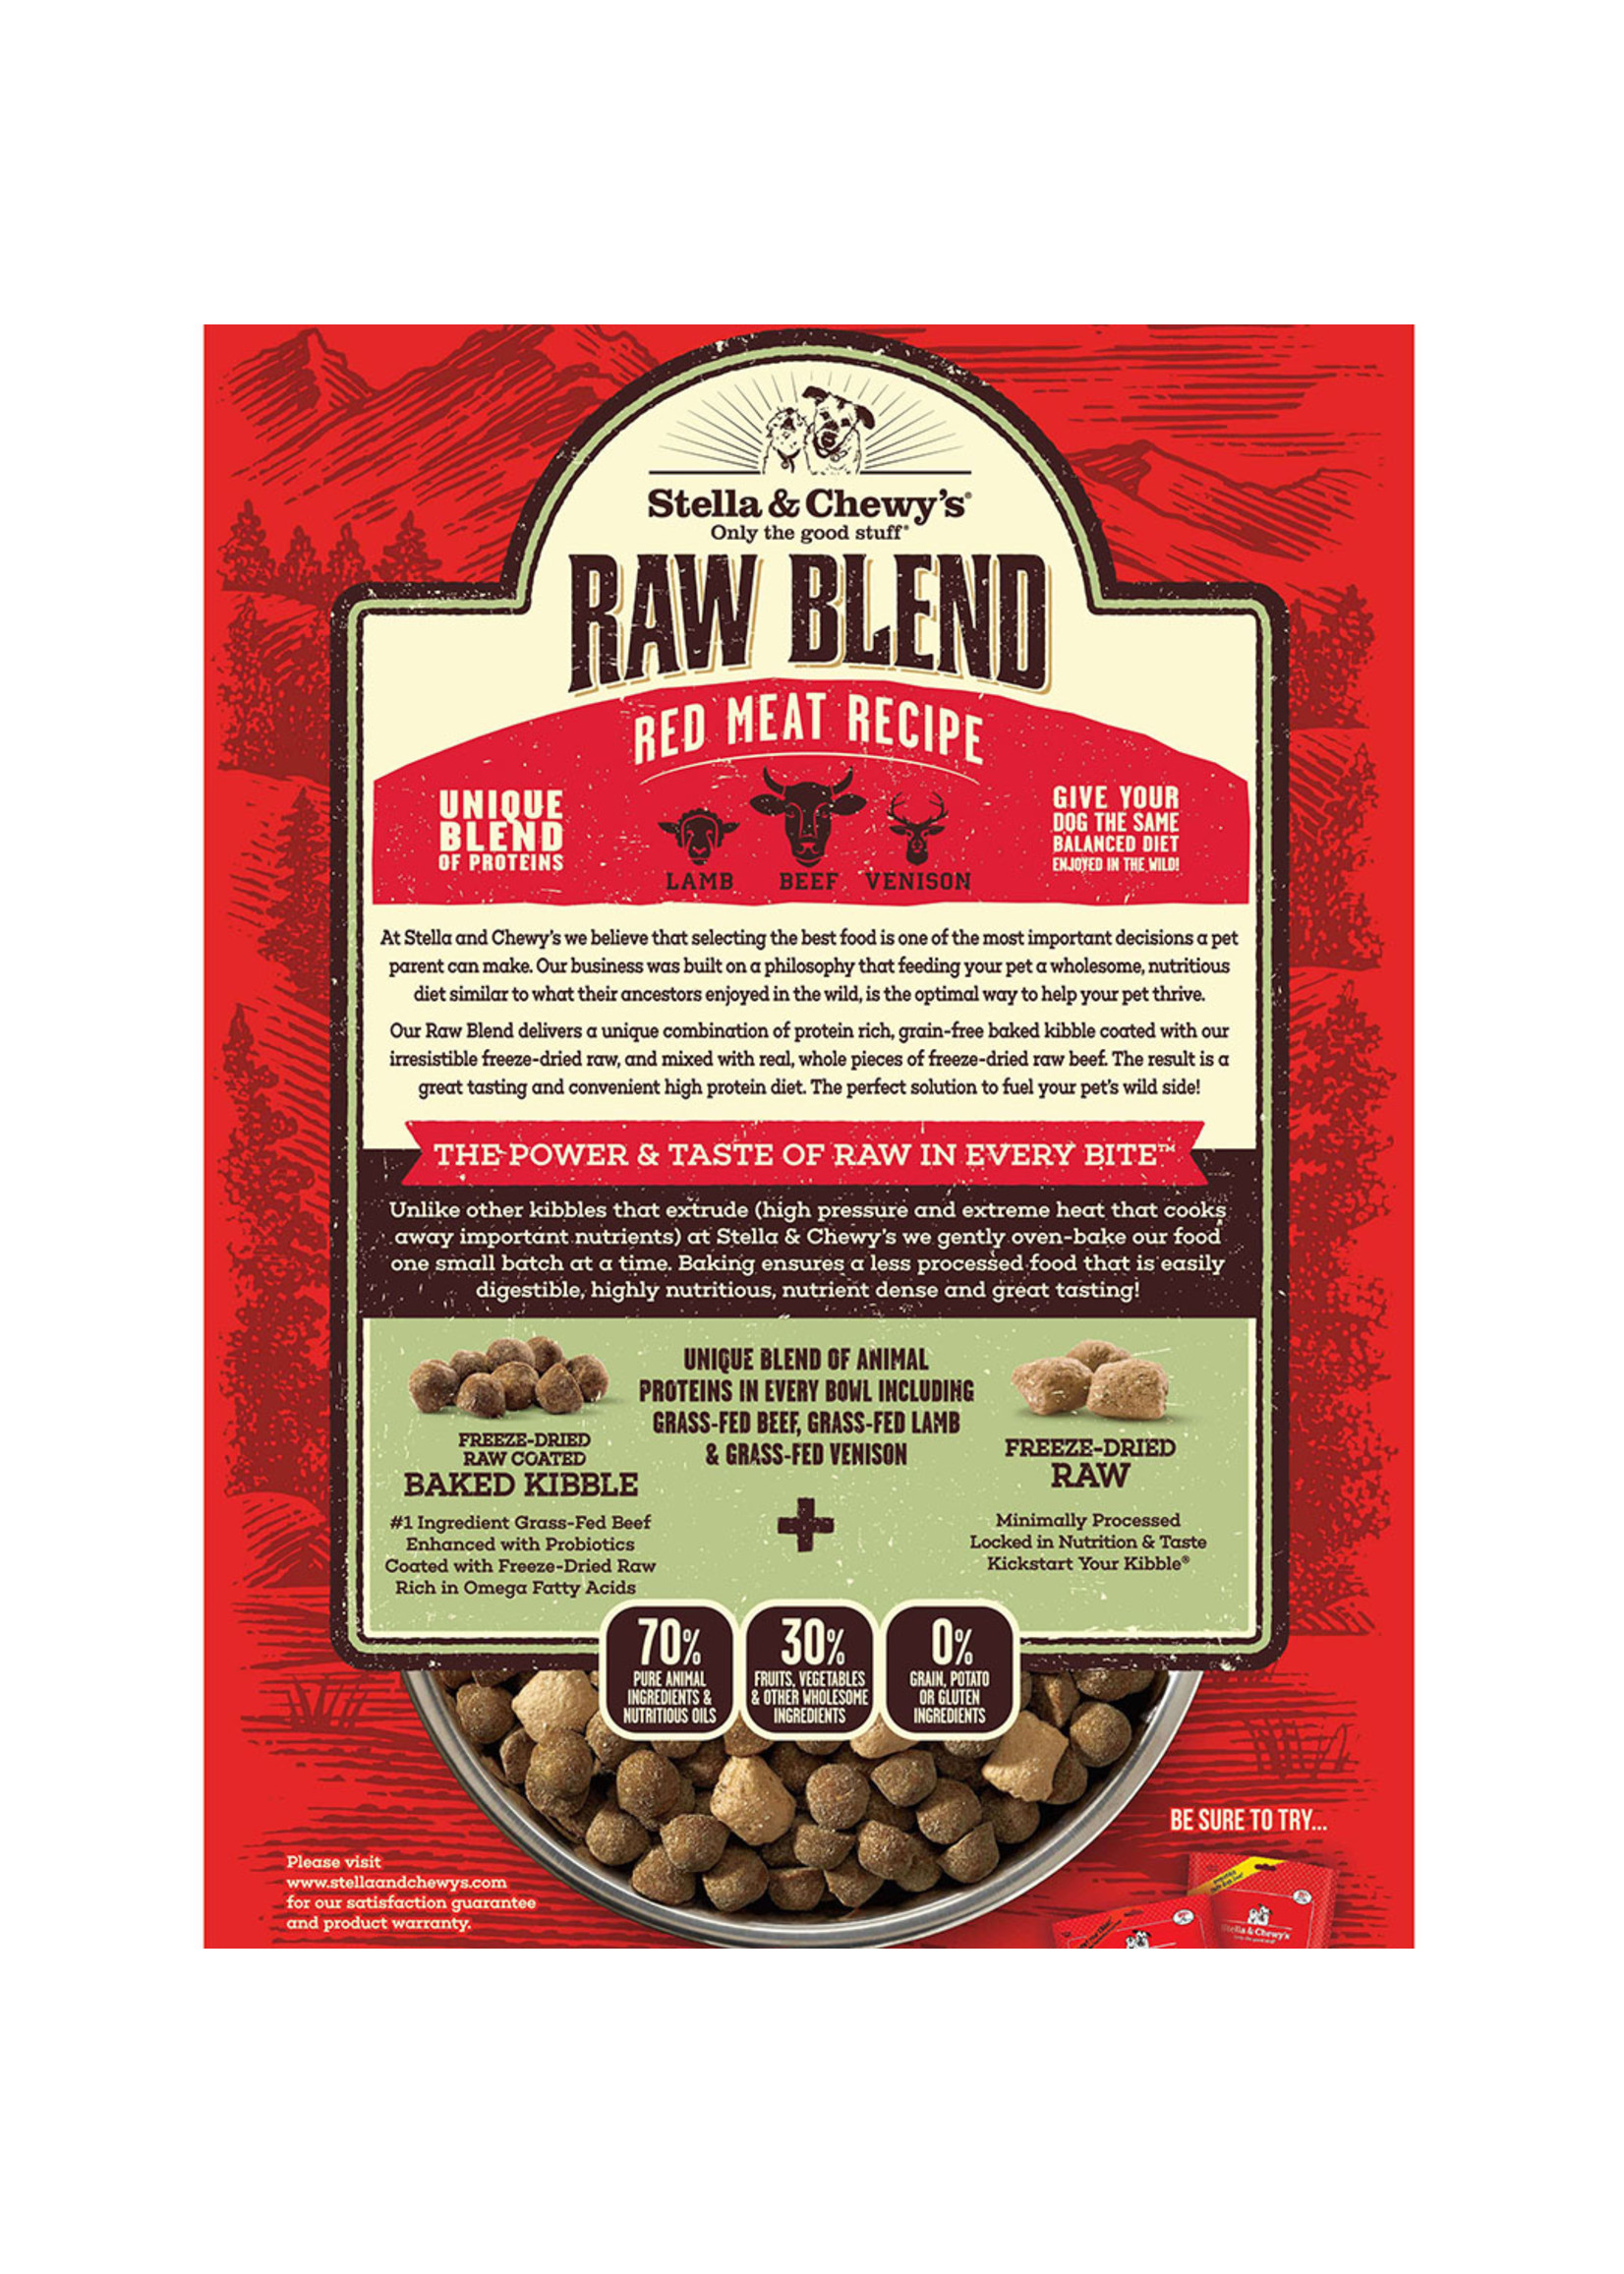 Stella & Chewy's Stella & Chewy's Raw Blend Red Meat